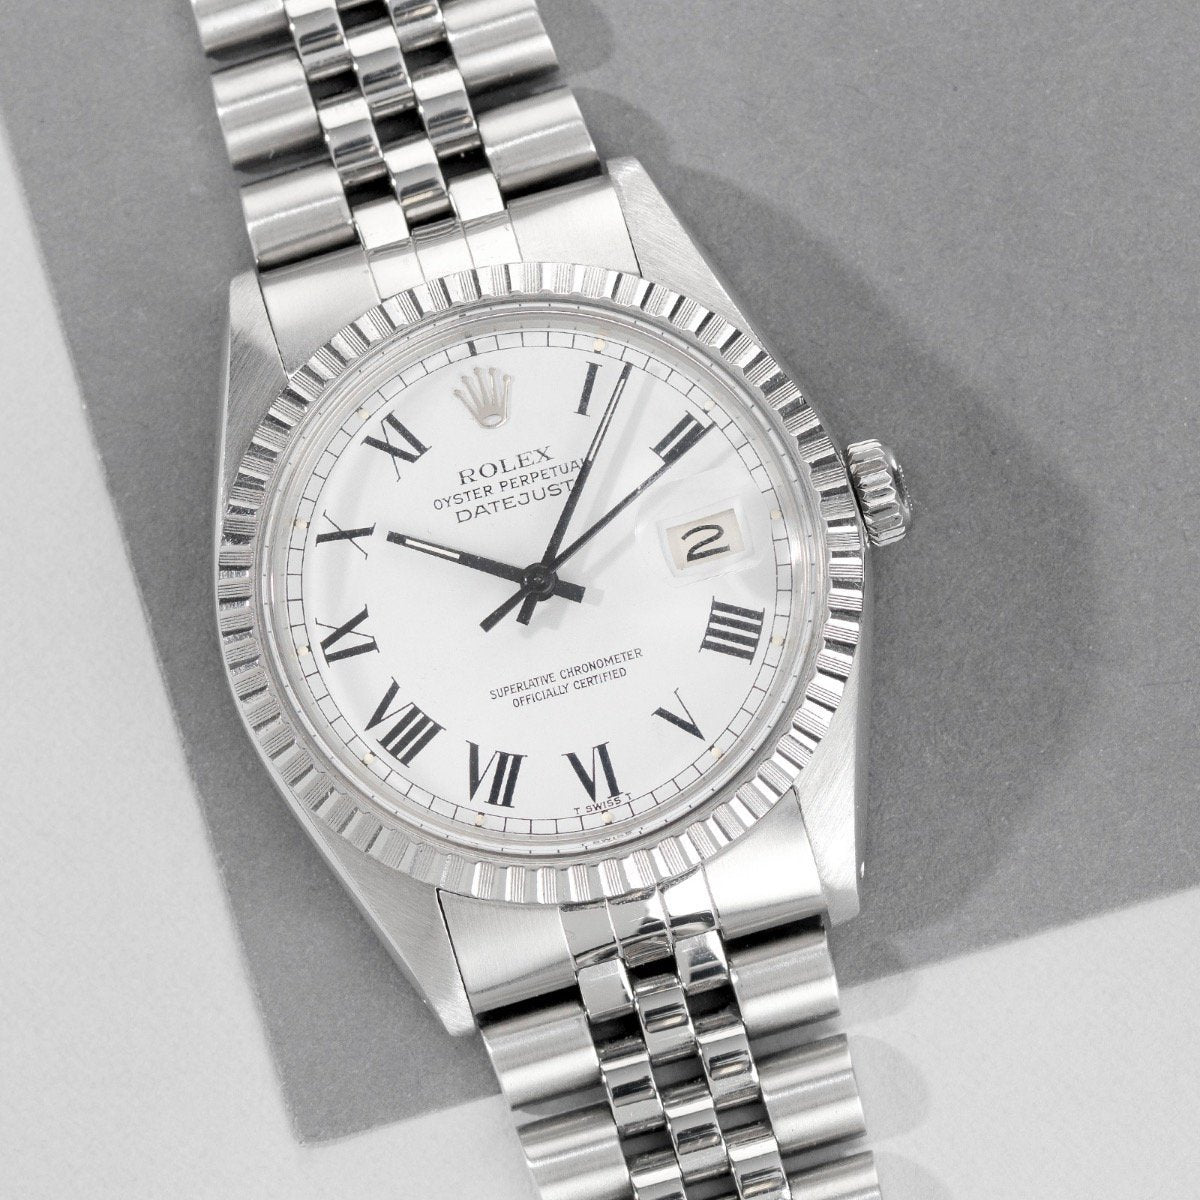 Rolex Datejust Reference 16030 Buckley Dial